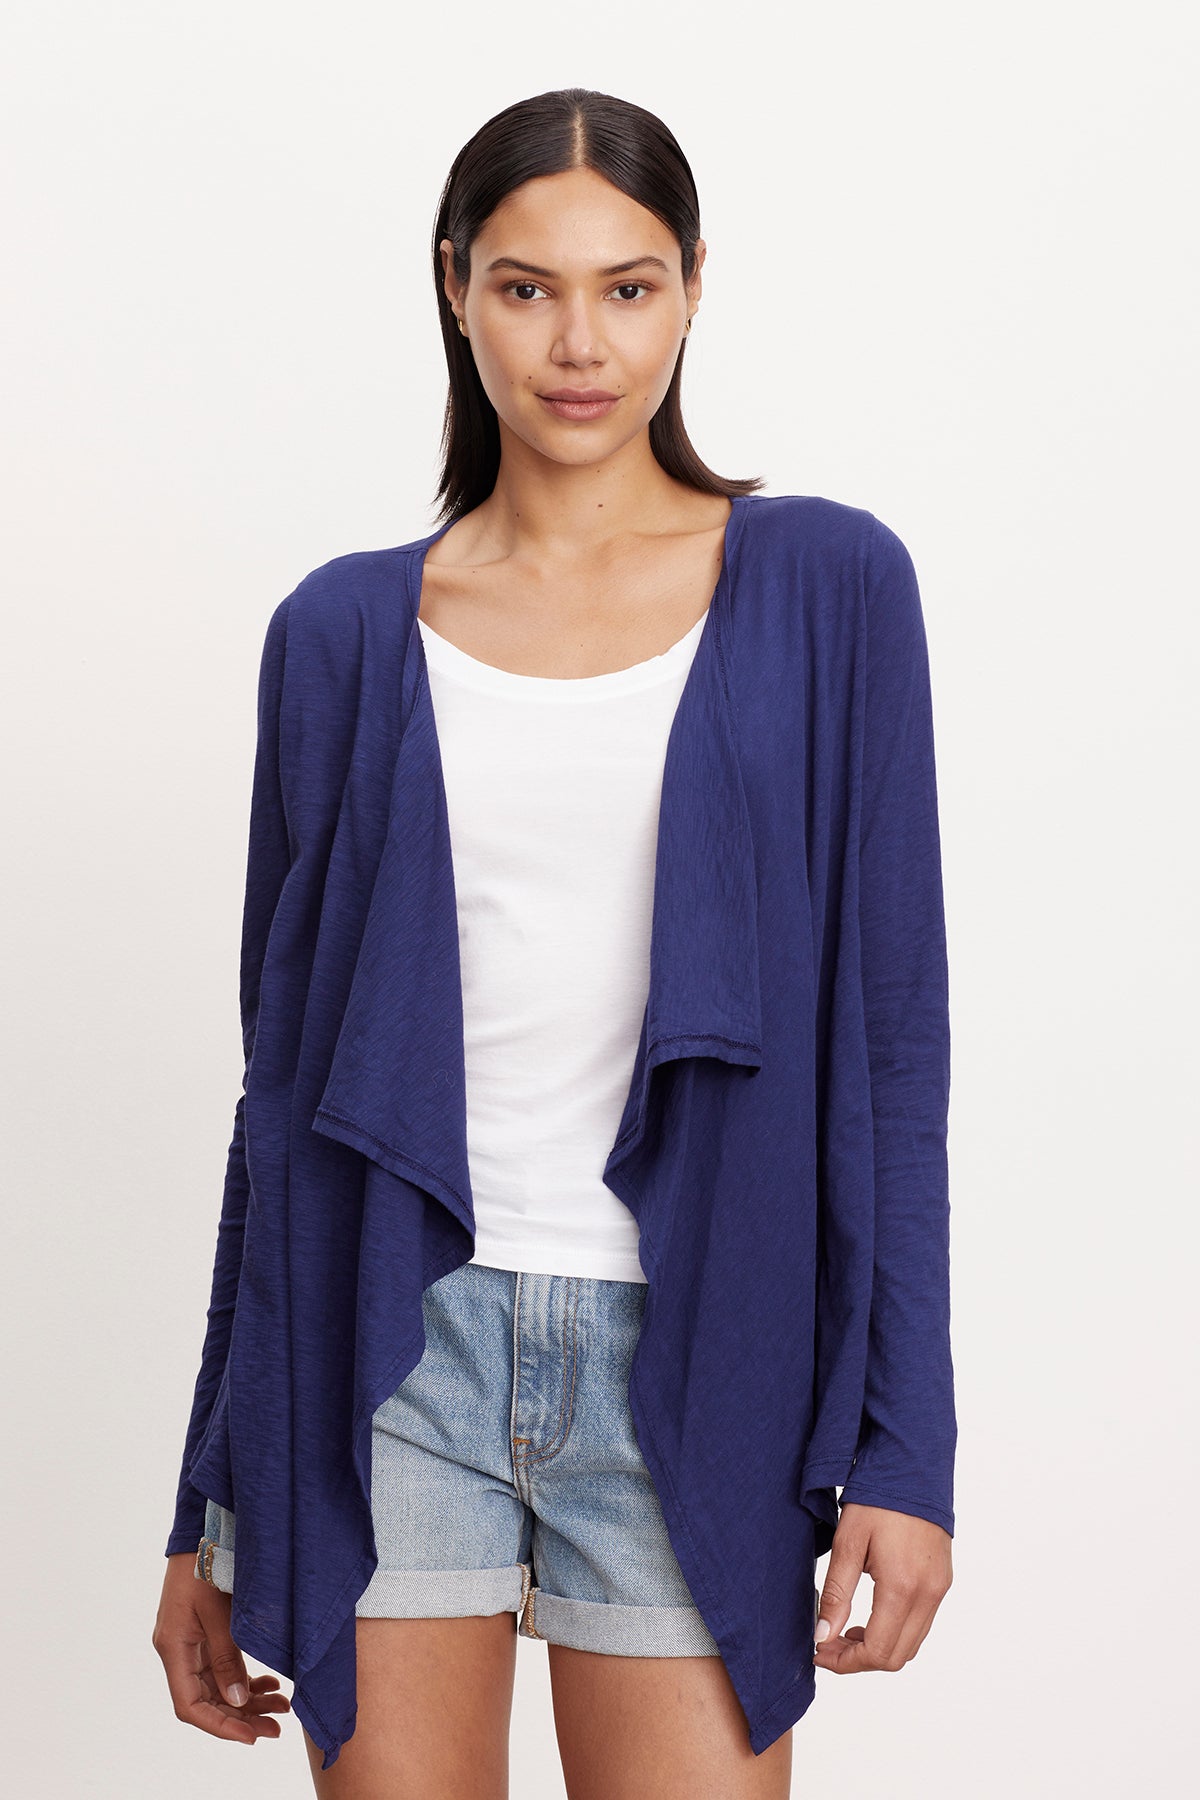 A woman wearing a Velvet by Graham & Spencer CHAMPAGNE OPEN CARDIGAN and shorts.-26743574855873